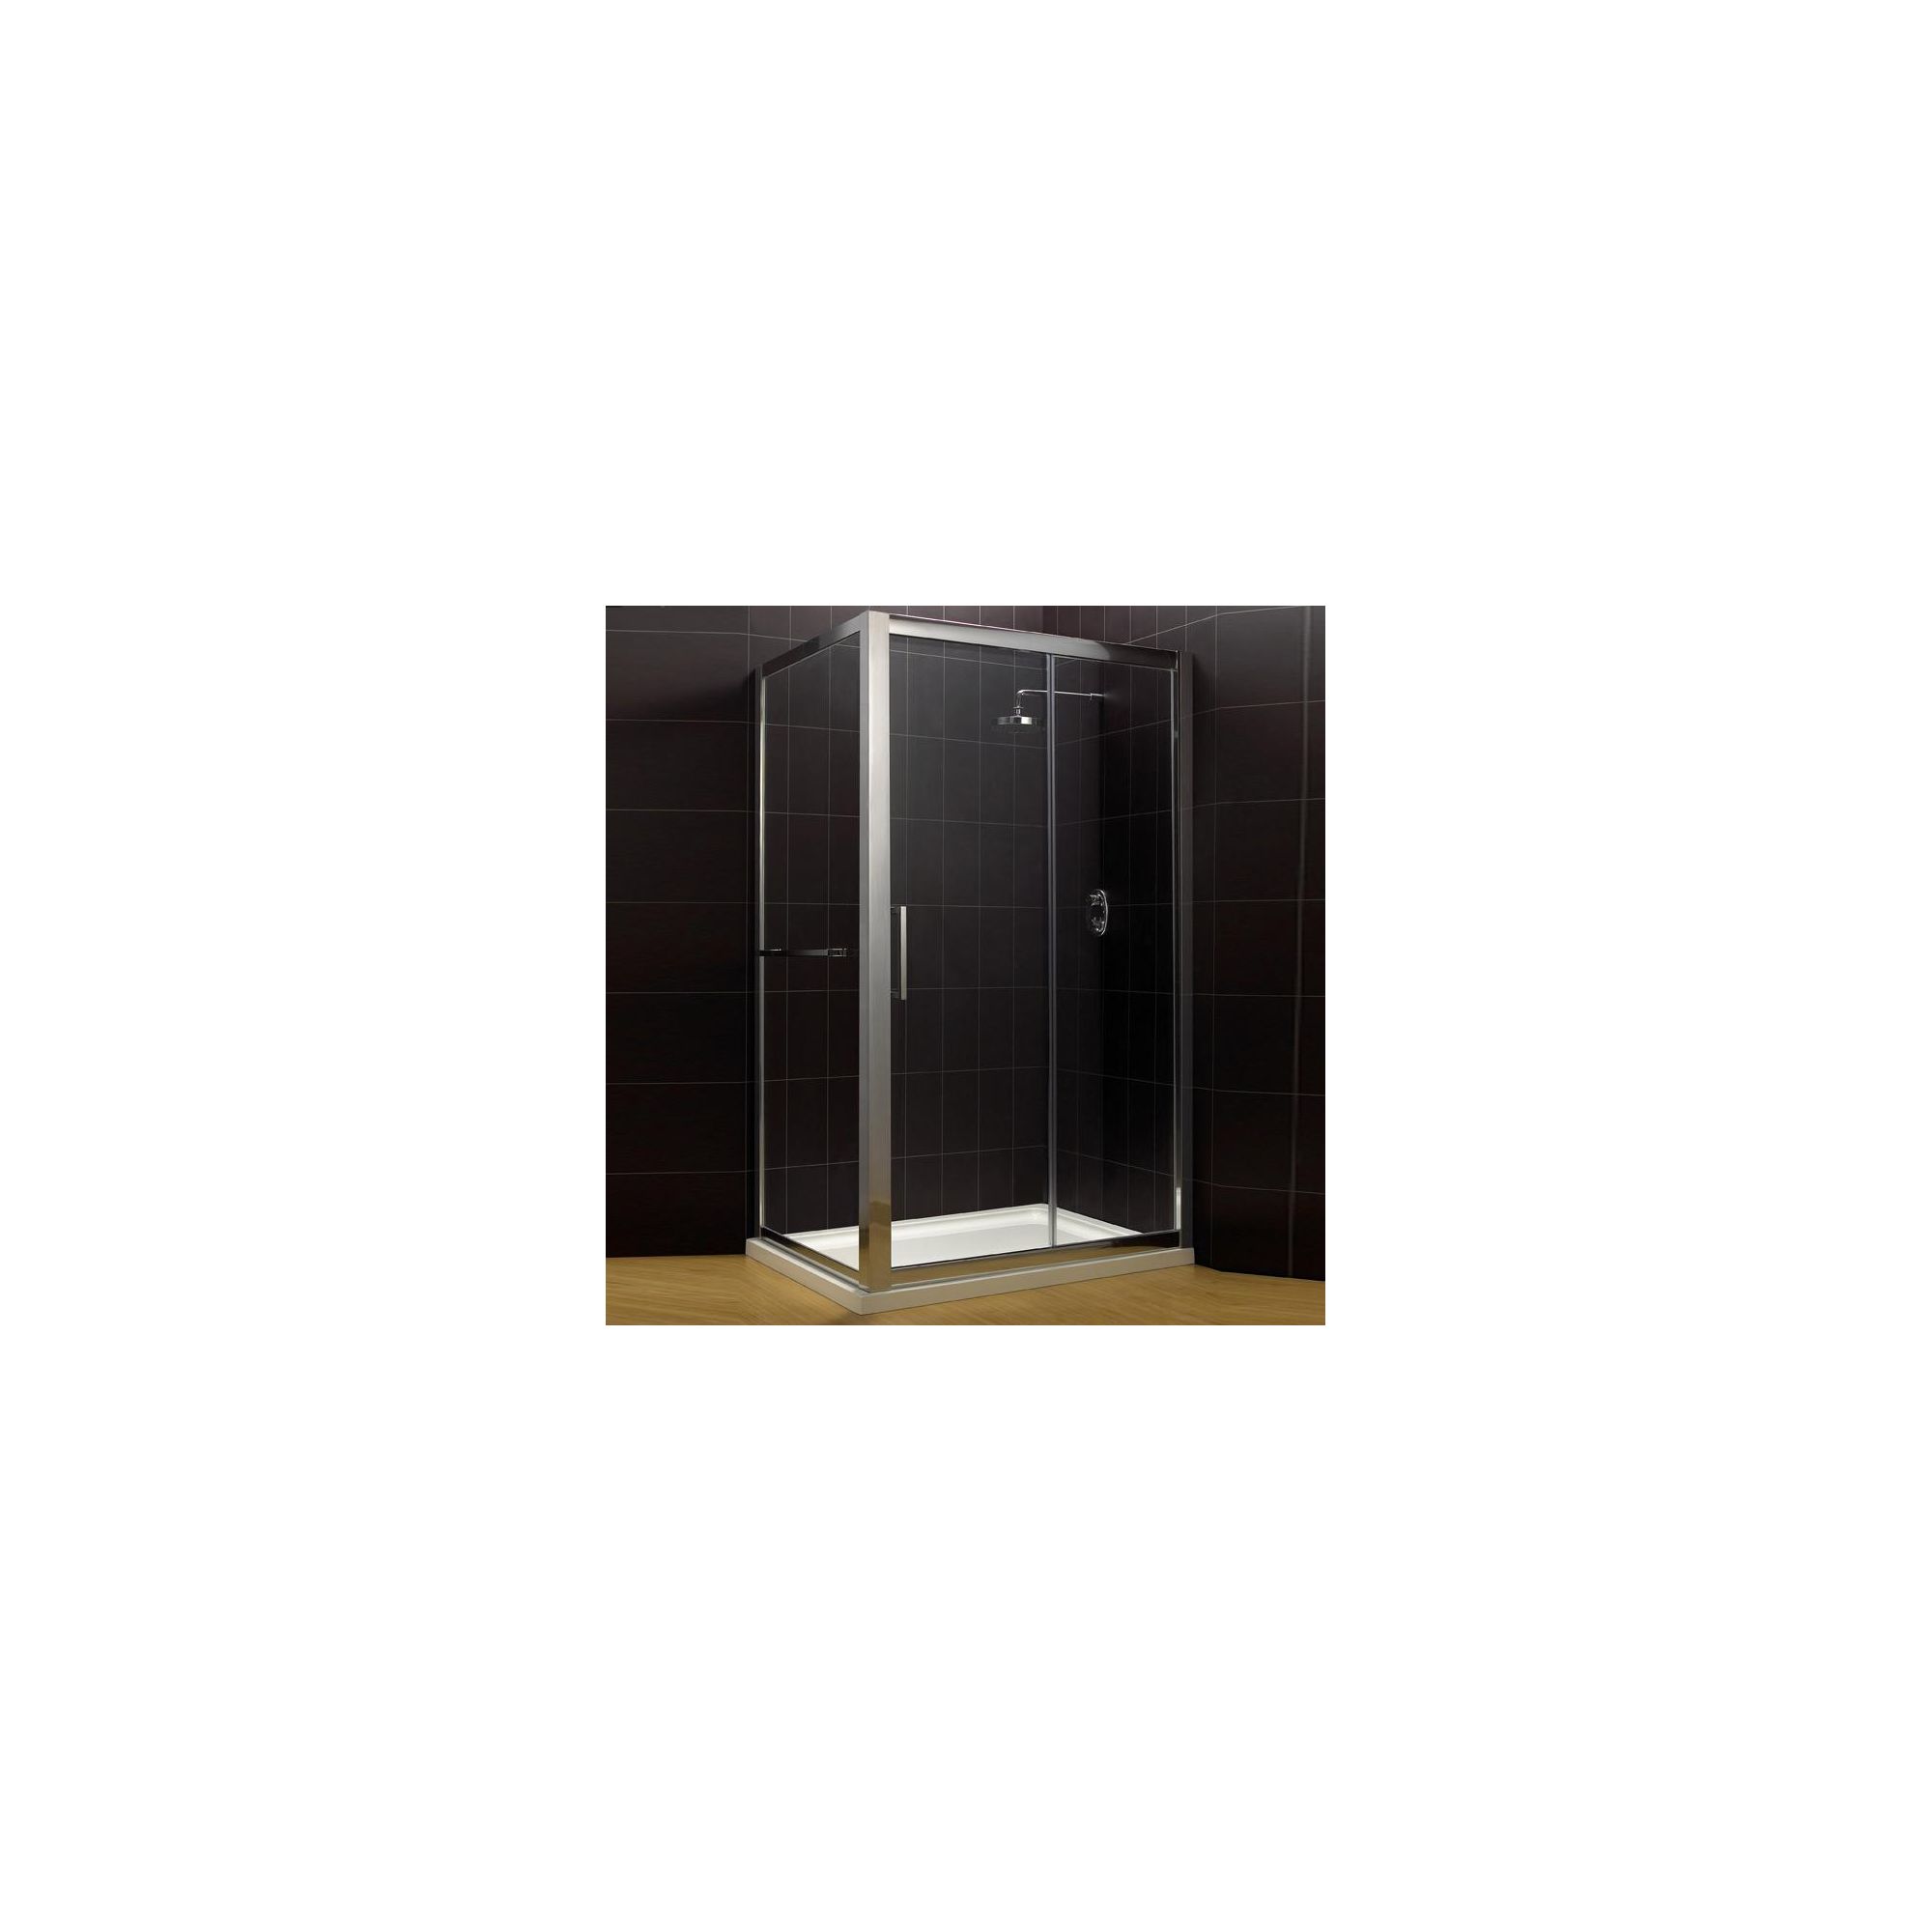 Duchy Supreme Silver Sliding Door Shower Enclosure with Towel Rail, 1200mm x 800mm, Standard Tray, 8mm Glass at Tesco Direct